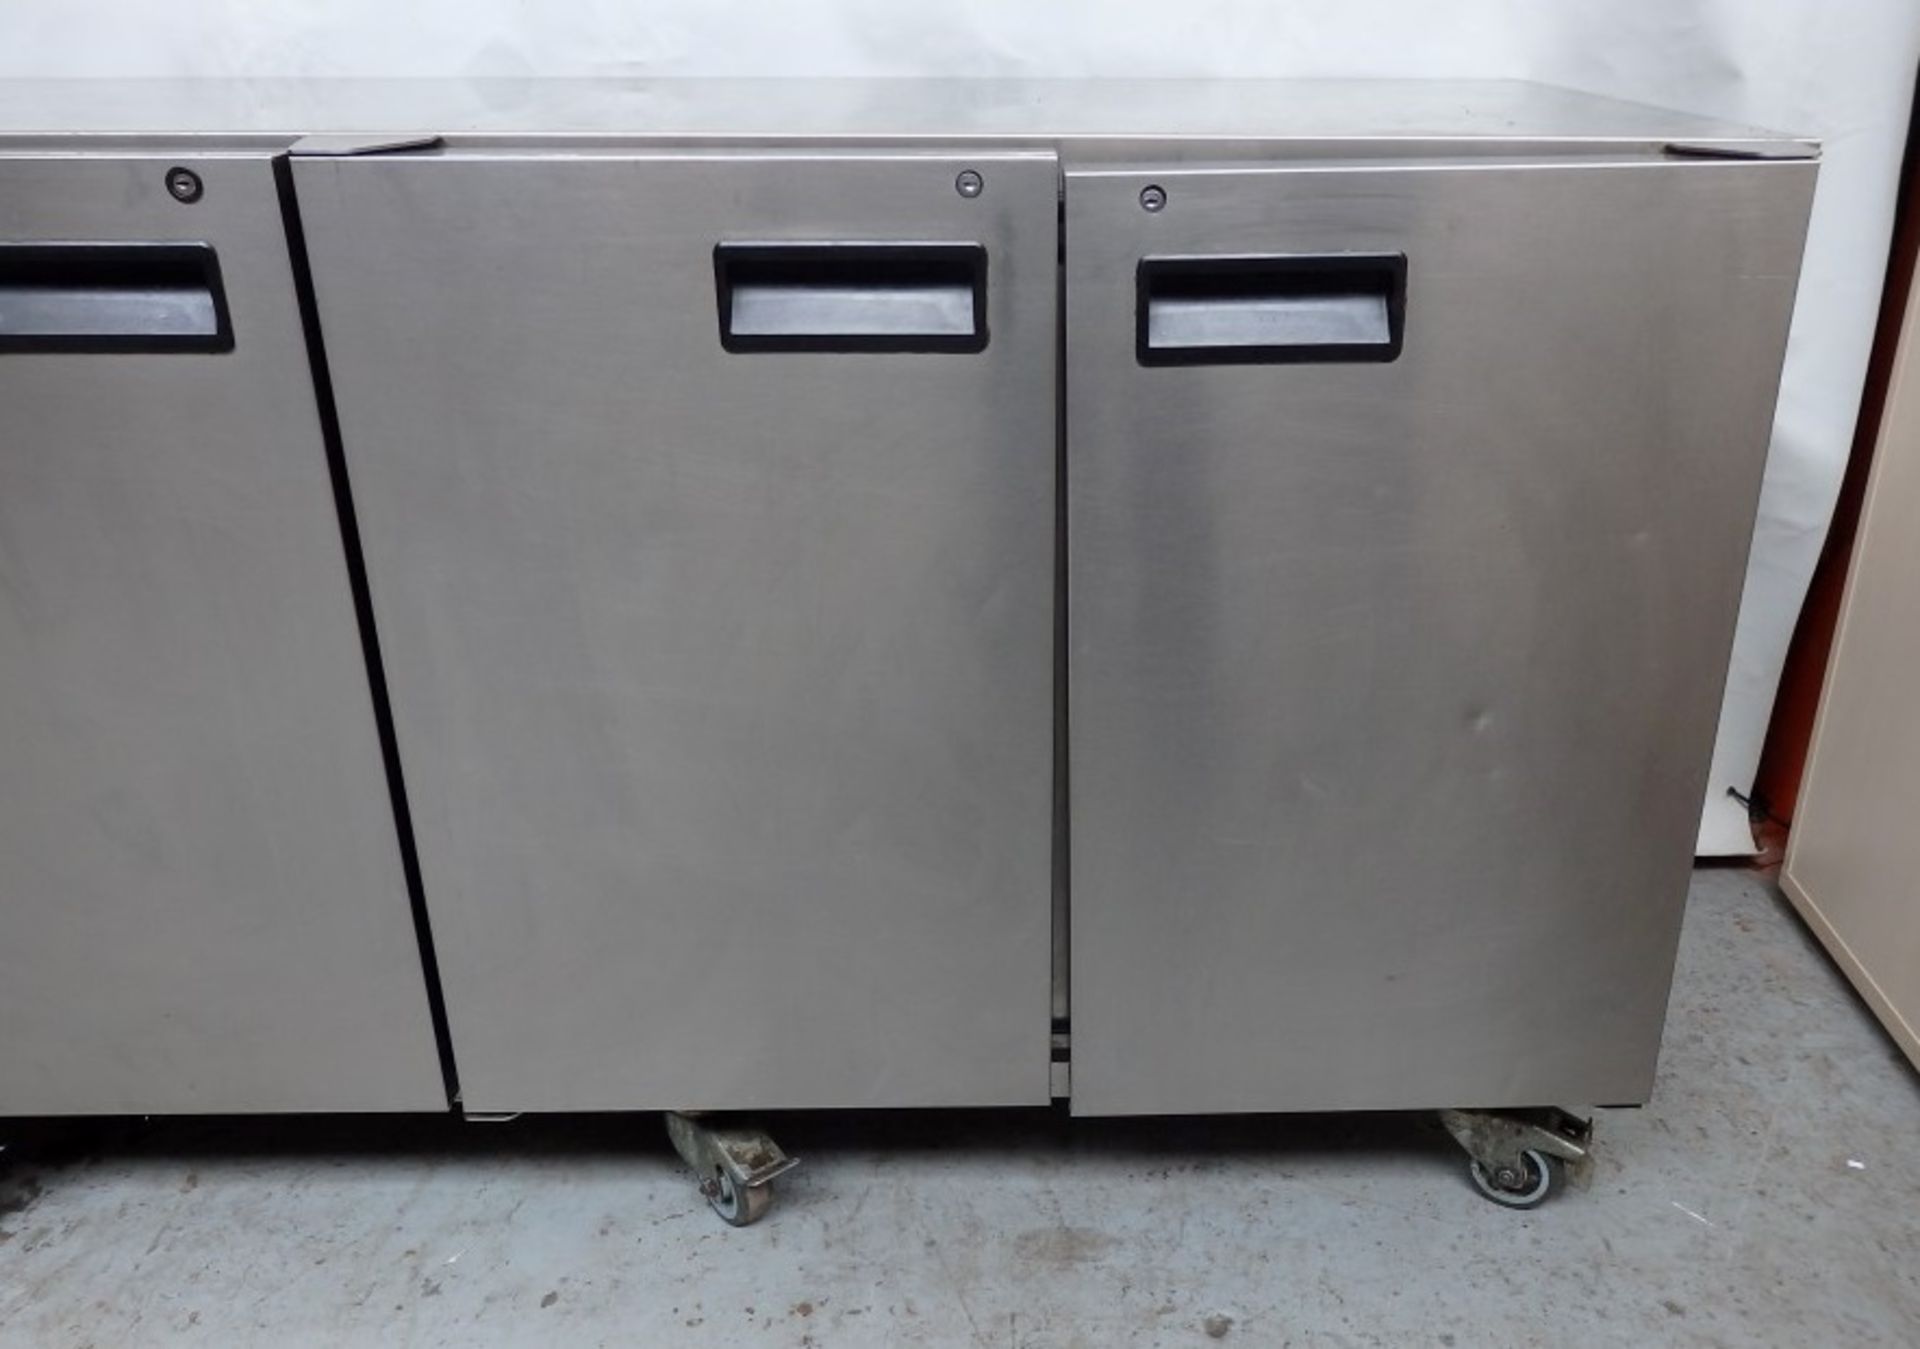 1 x FOSTER Commercial Undercounter Refrigerator With 3-Door Storage, Drawer And Stainless Steel - Image 12 of 13